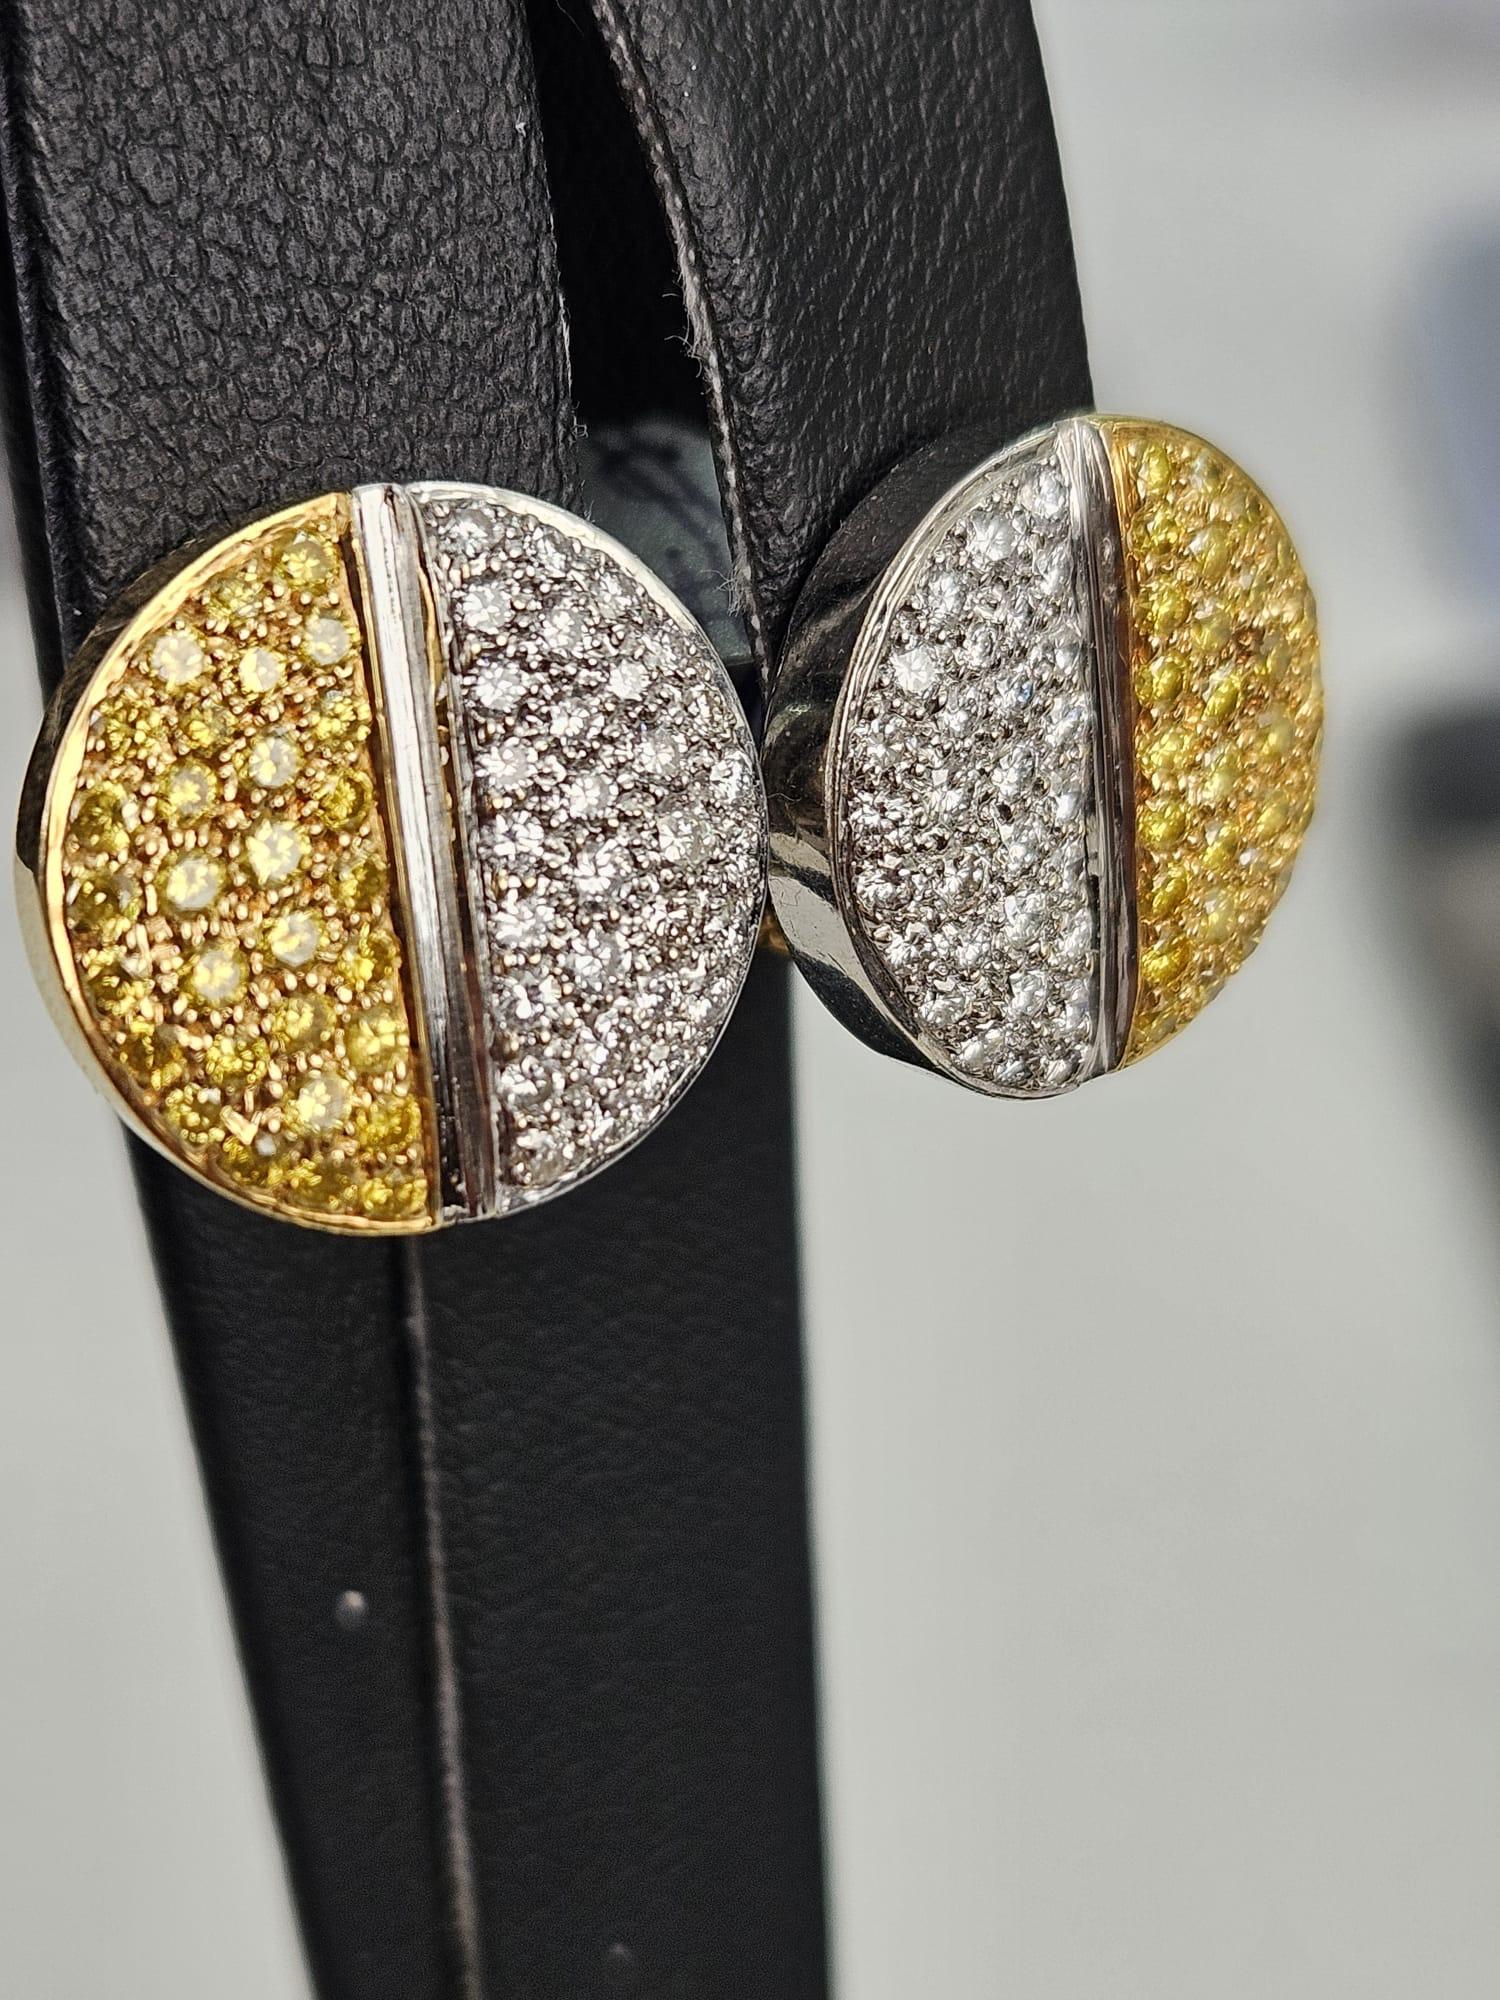 Introducing a pair of enchanting 1.64-carat Canary and White Diamond earrings, where the beauty of contrasting hues and harmonious design converge in a captivating circle. The circular shape of these earrings is divided into two halves, with the